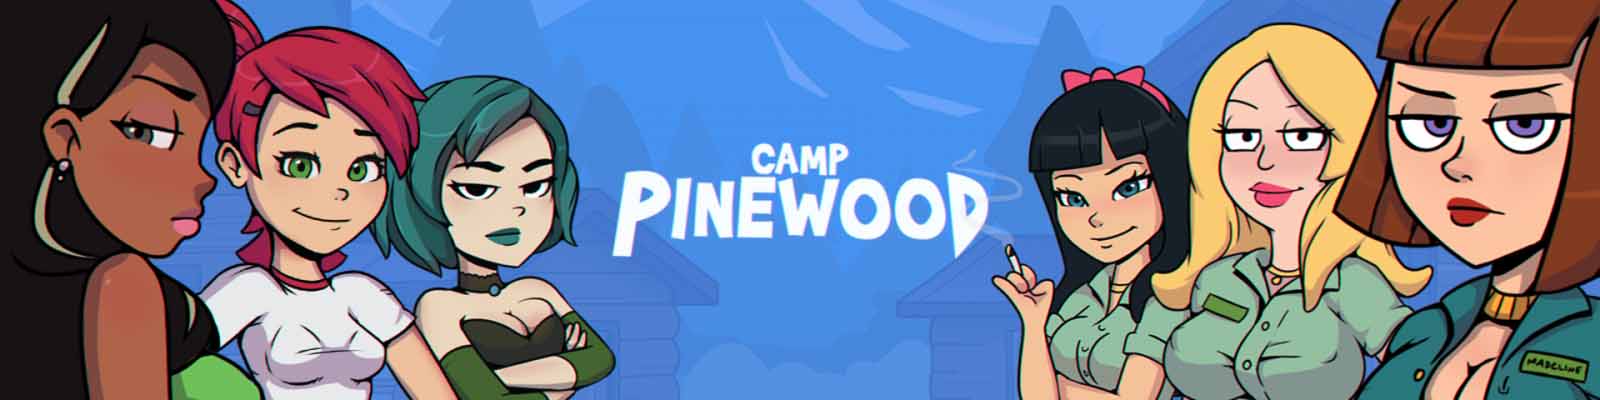 Camp Pinewood Uncen Adv Slg Android Compatible Eng Rus